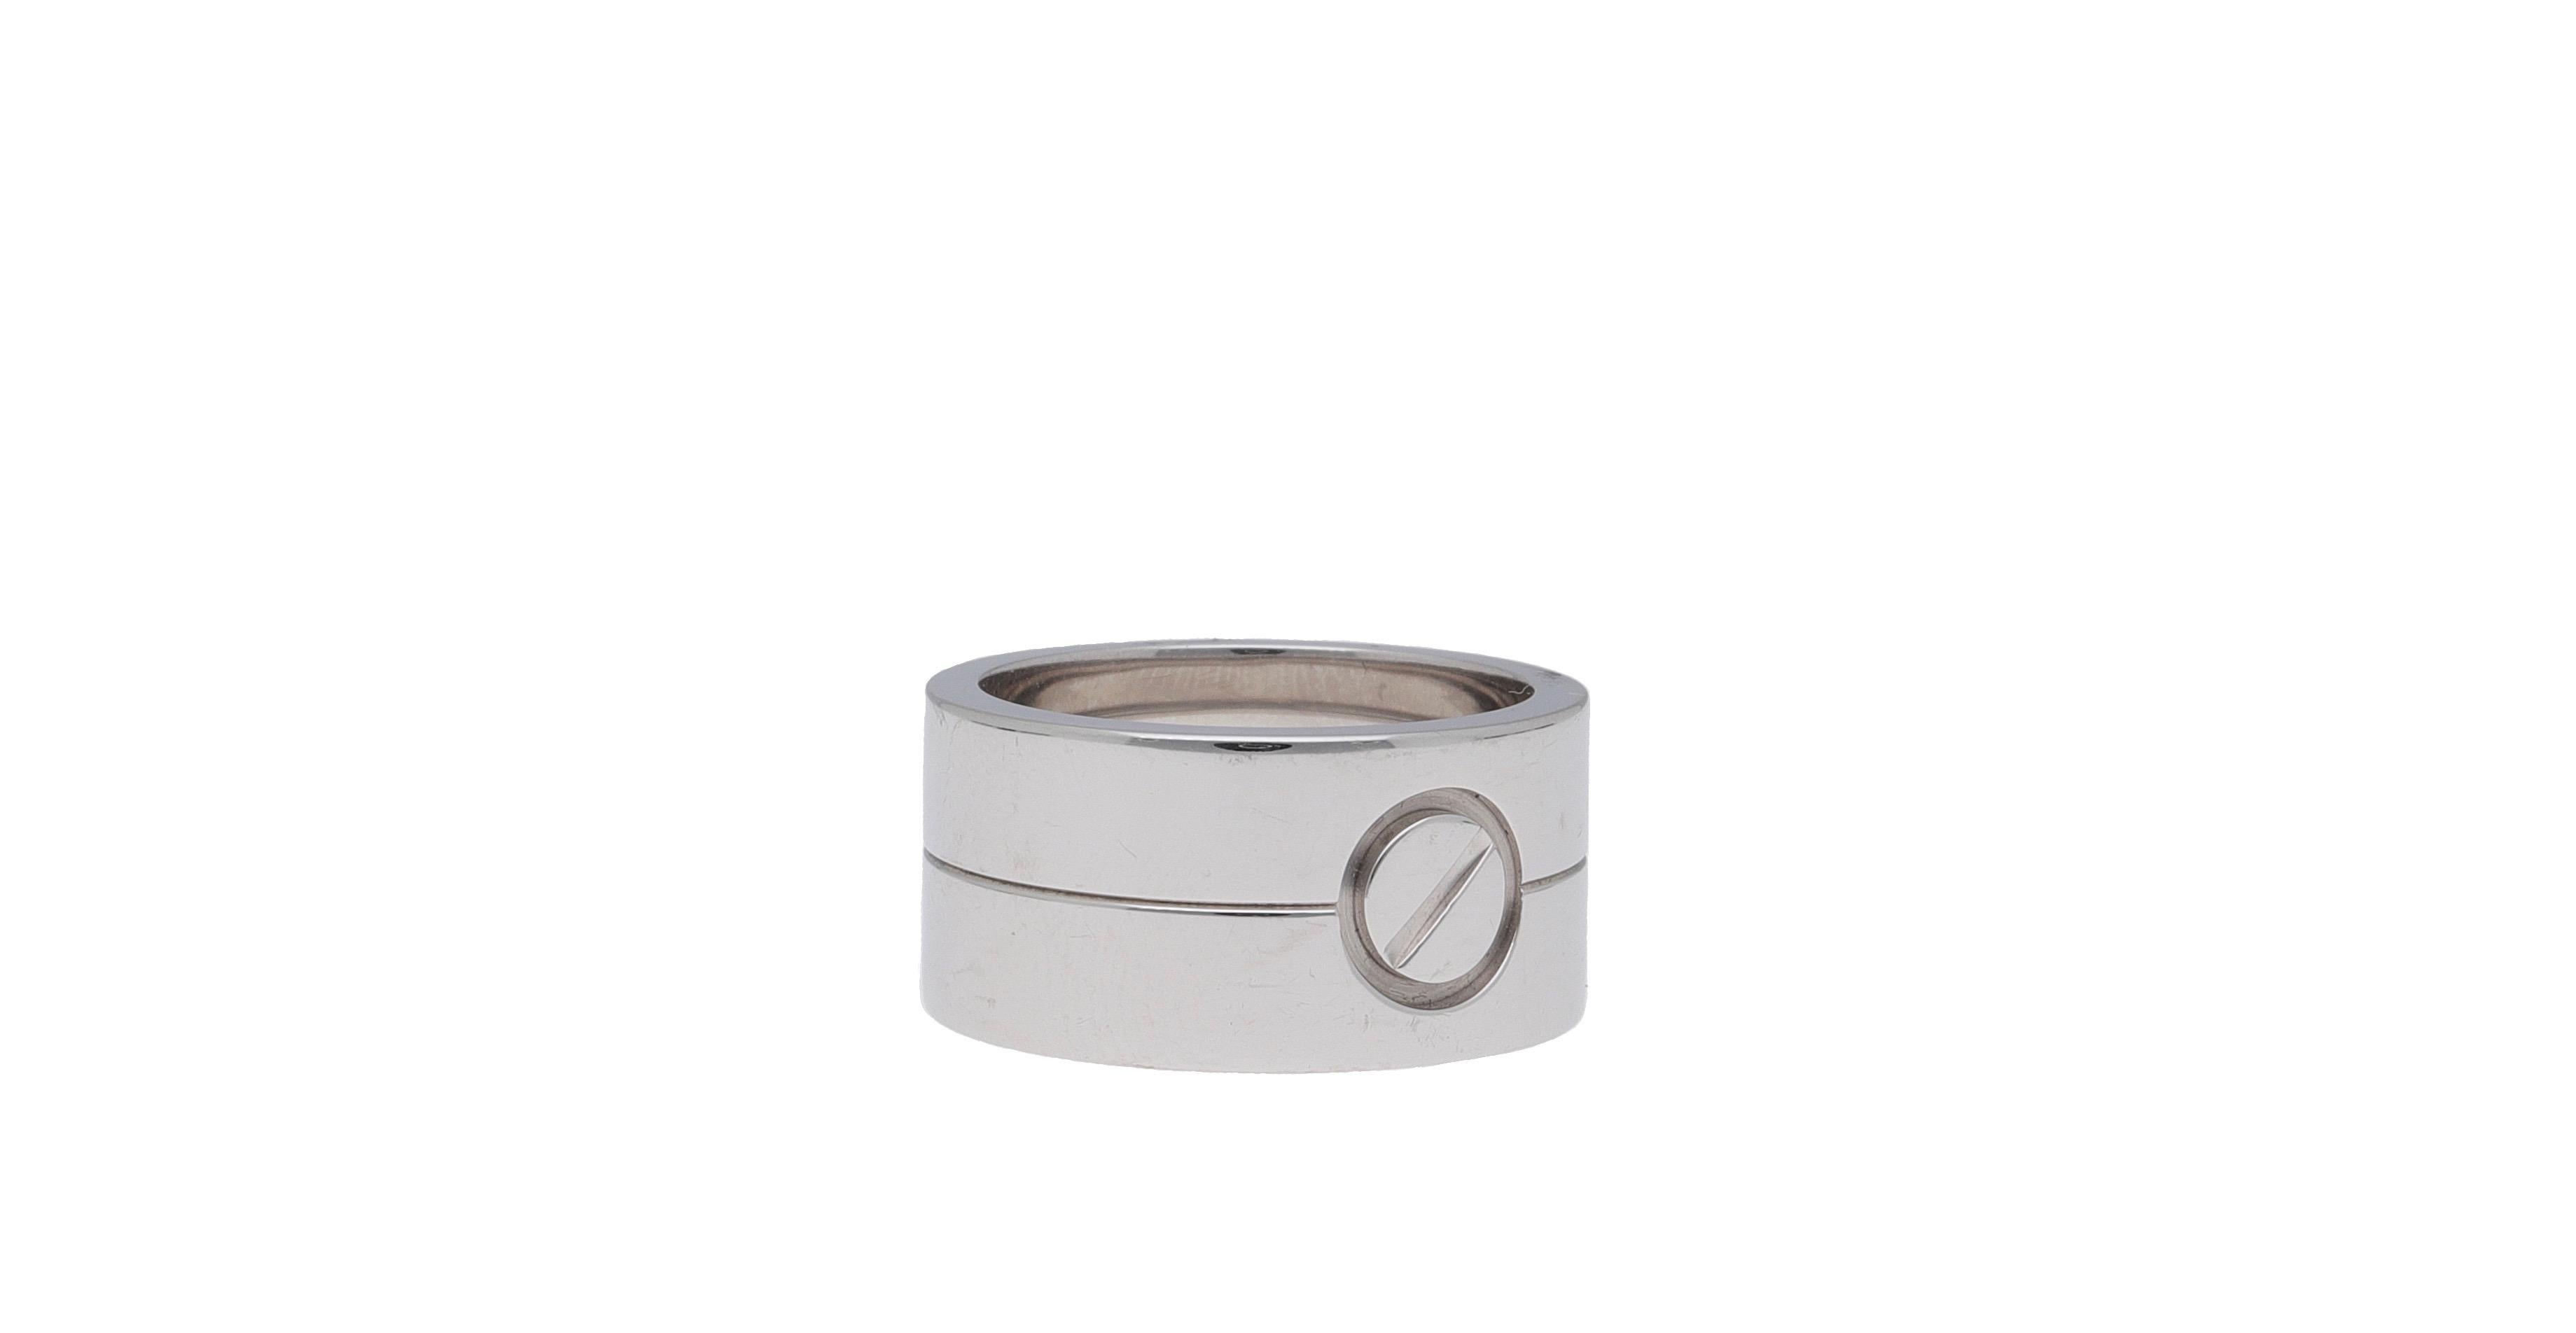 Cartier Love wide band crafted in 18 karat white gold.
This iconic design is suitable for every occasion.
Love is the expression of Cartier’s design vision. 
It presents the perfection of clean lines and precise proportions.
This collection was